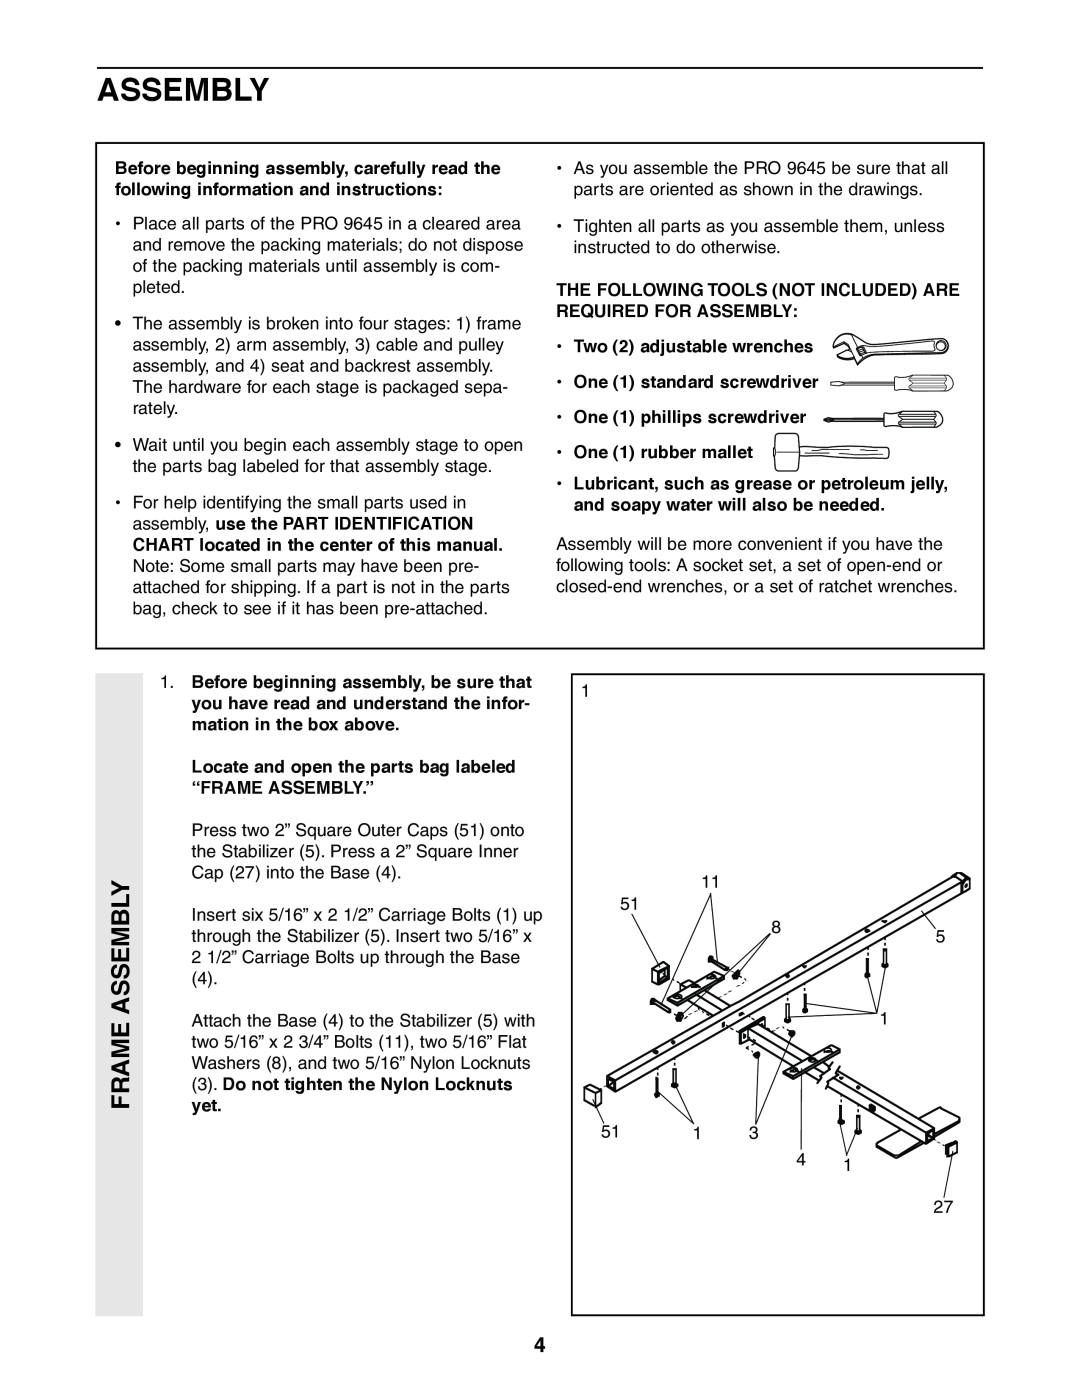 Weider 831.159380 Frame Assembly, CHART located in the center of this manual, Do not tighten the Nylon Locknuts yet 